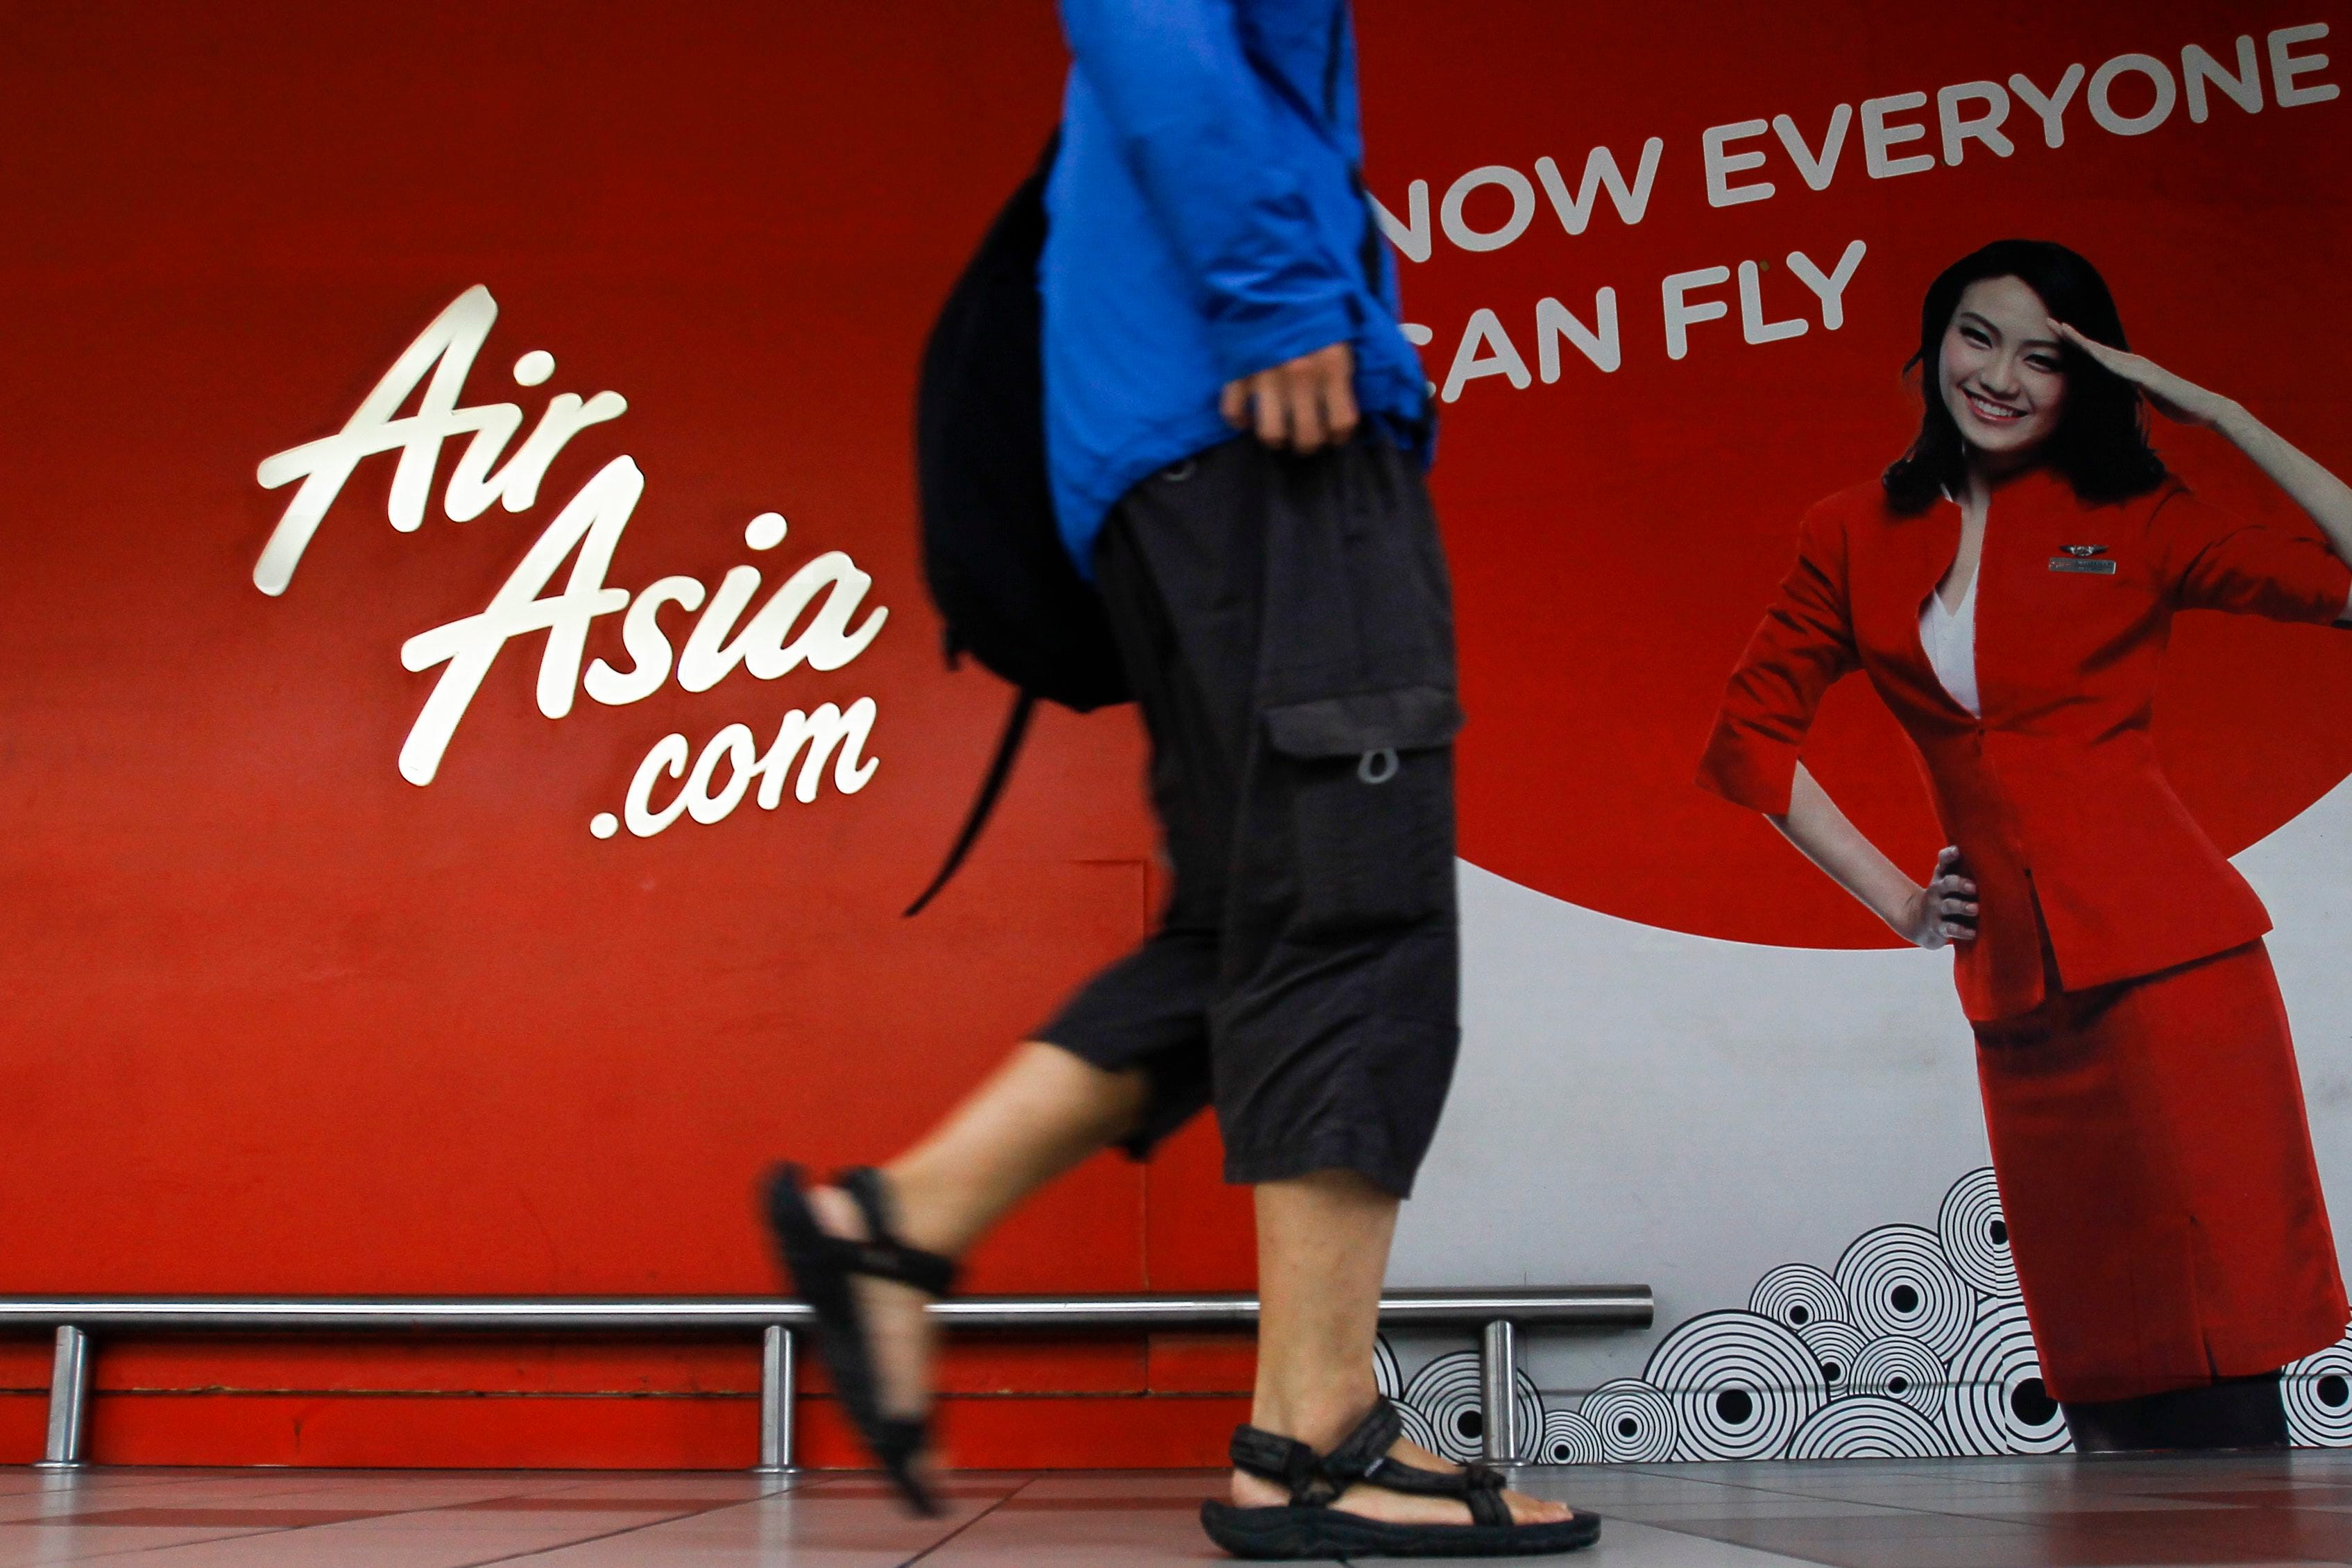 Possible debris spotted in area where AirAsia jet vanished